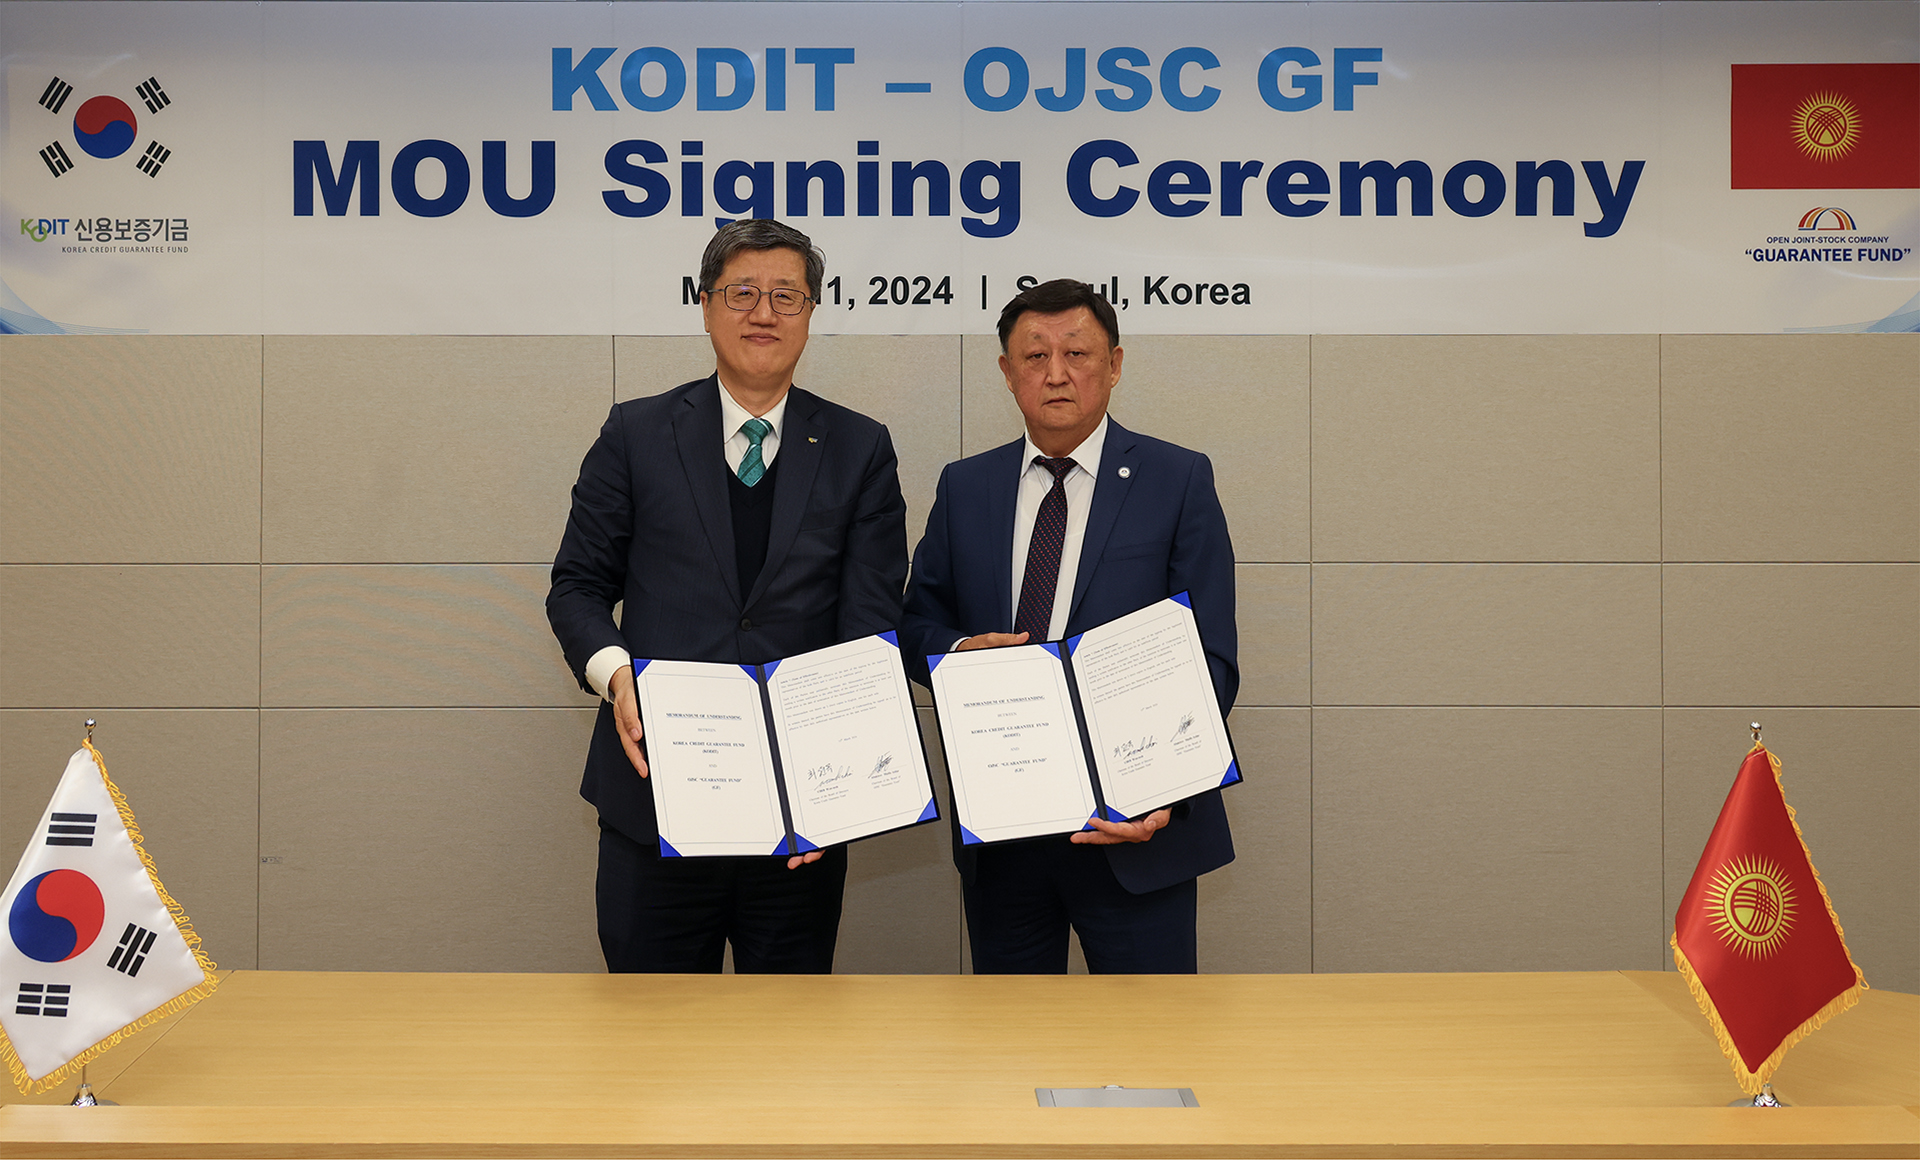 KODIT Signs an MOU with Kyrgyz Guarantee Fund on Deepening Mutual Cooperation (March 12, 2024)